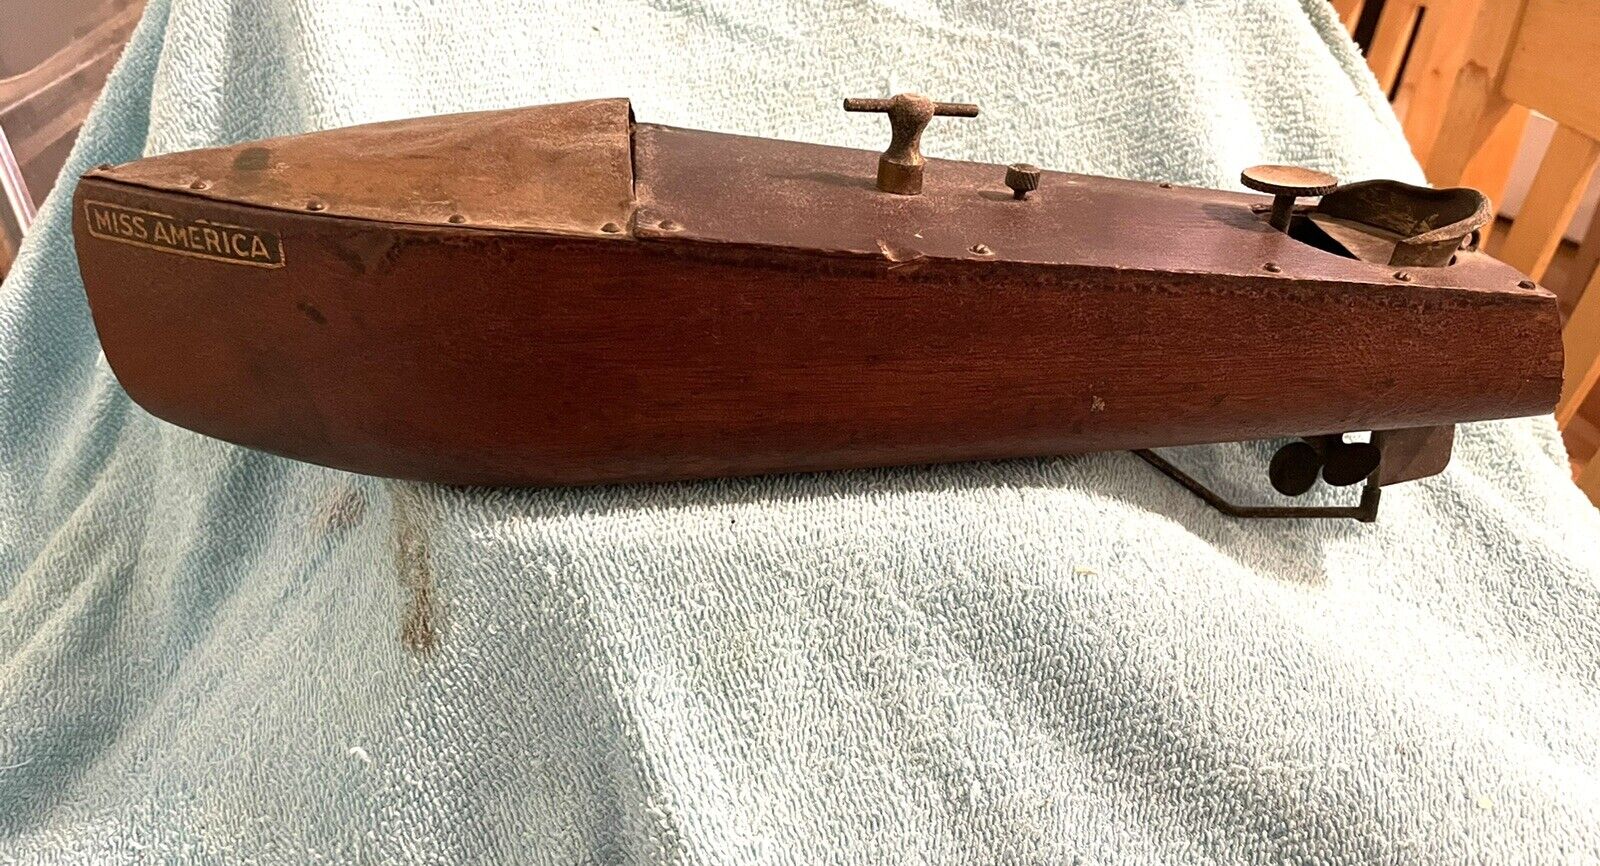 Mengel Playthings Miss America Antique Toy Boat-rare Example